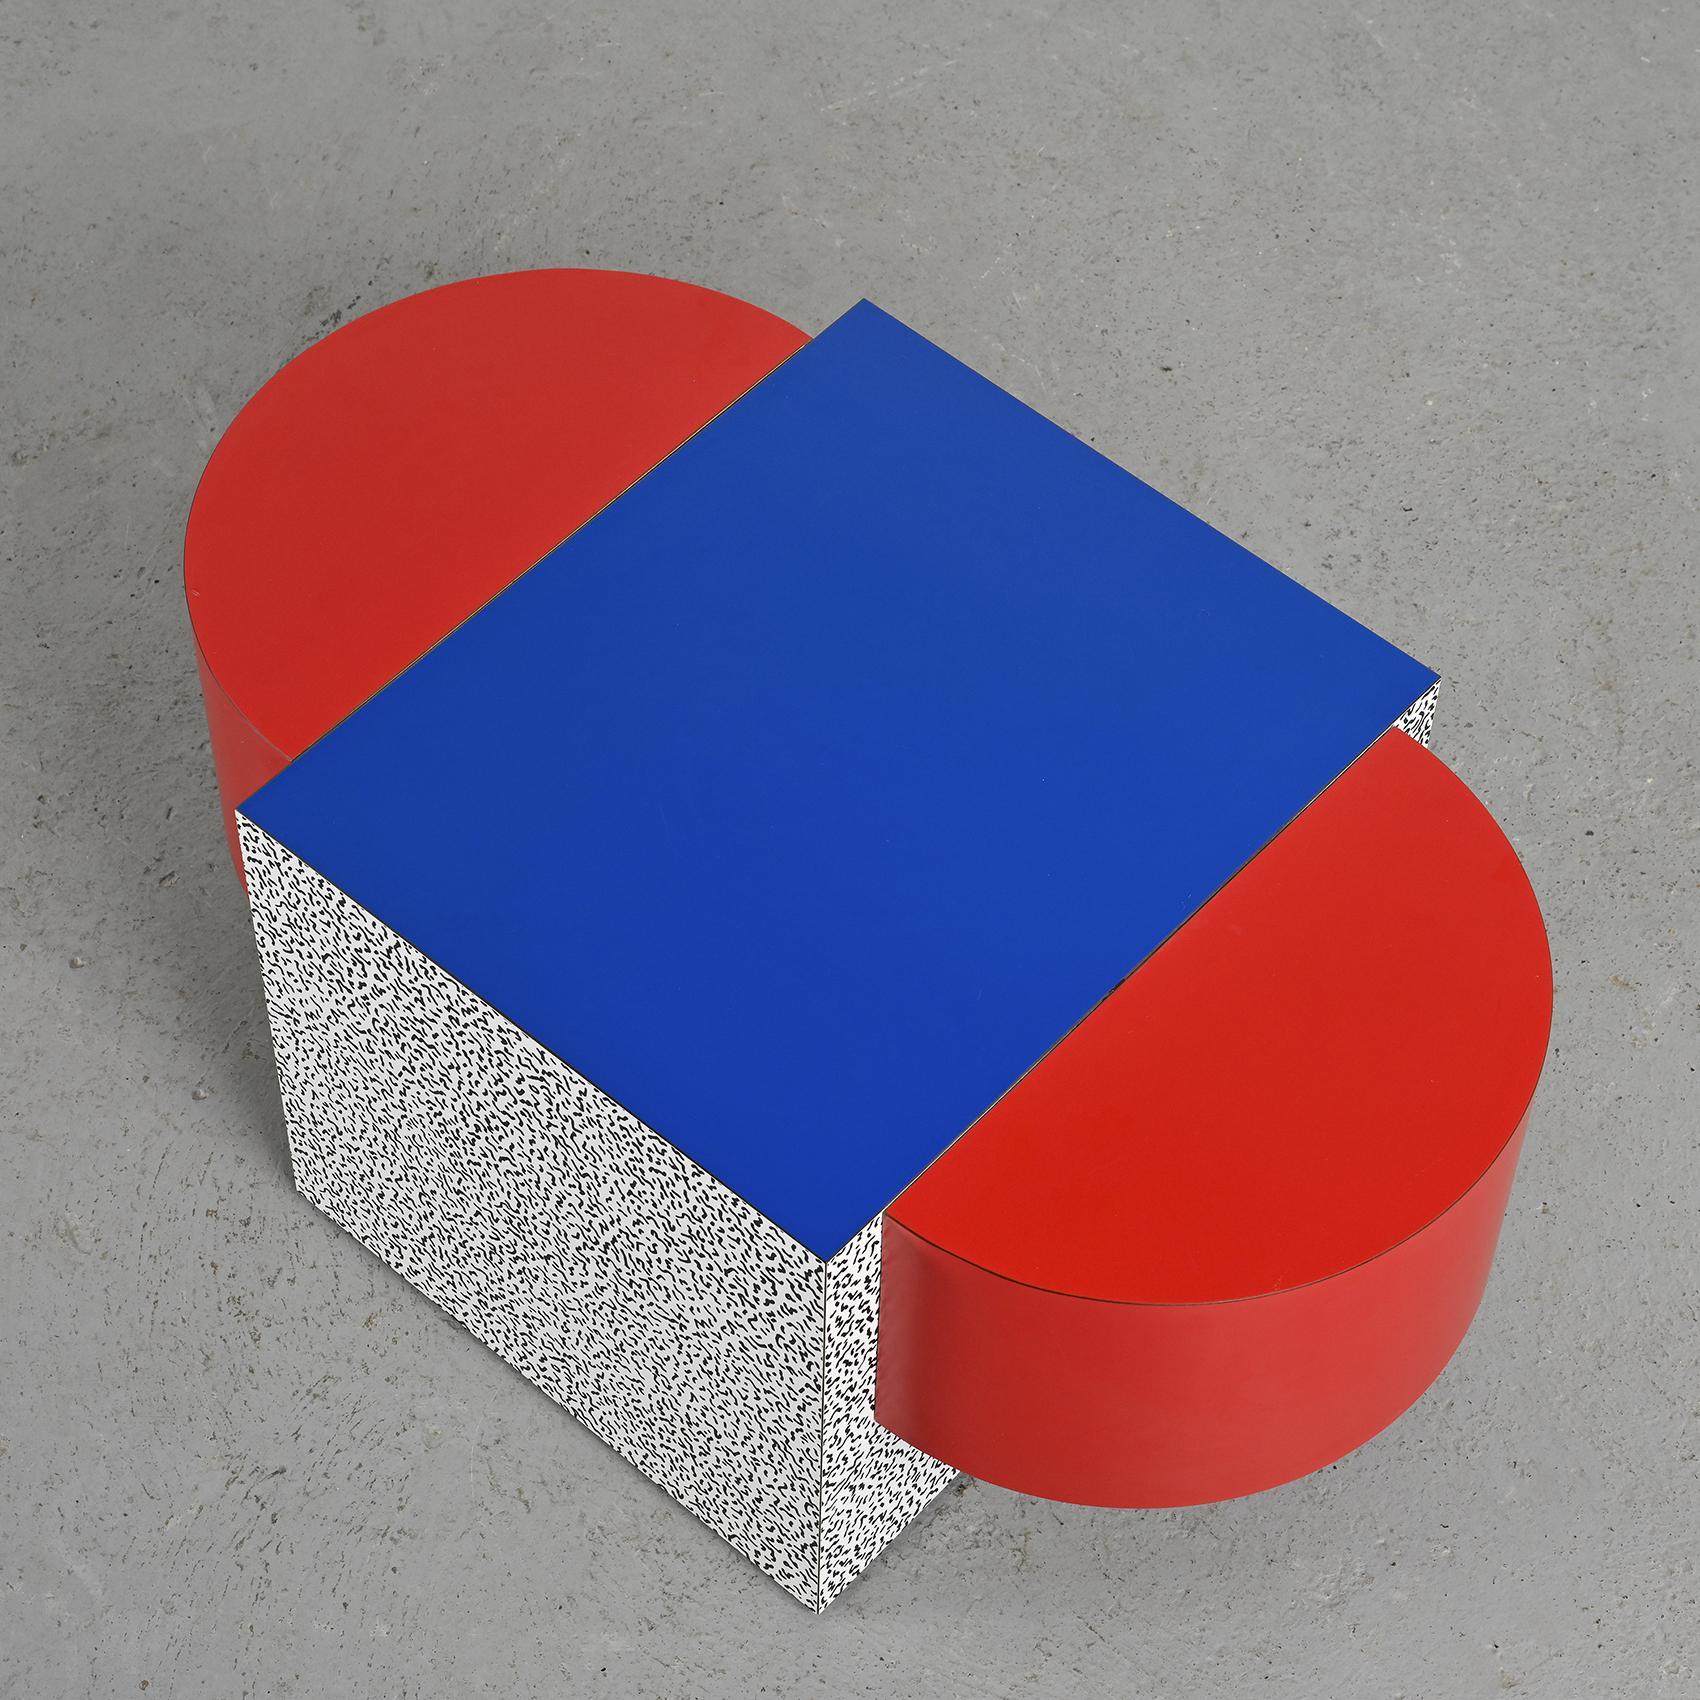 A beautiful example of Ettore Sottsass' work, the Table Tony No.3 was conceived by the renowned designer in 1979. This particular piece was published by Anthologie Quartett around 1990.

It is characterized by an oval tabletop surrounding a square,